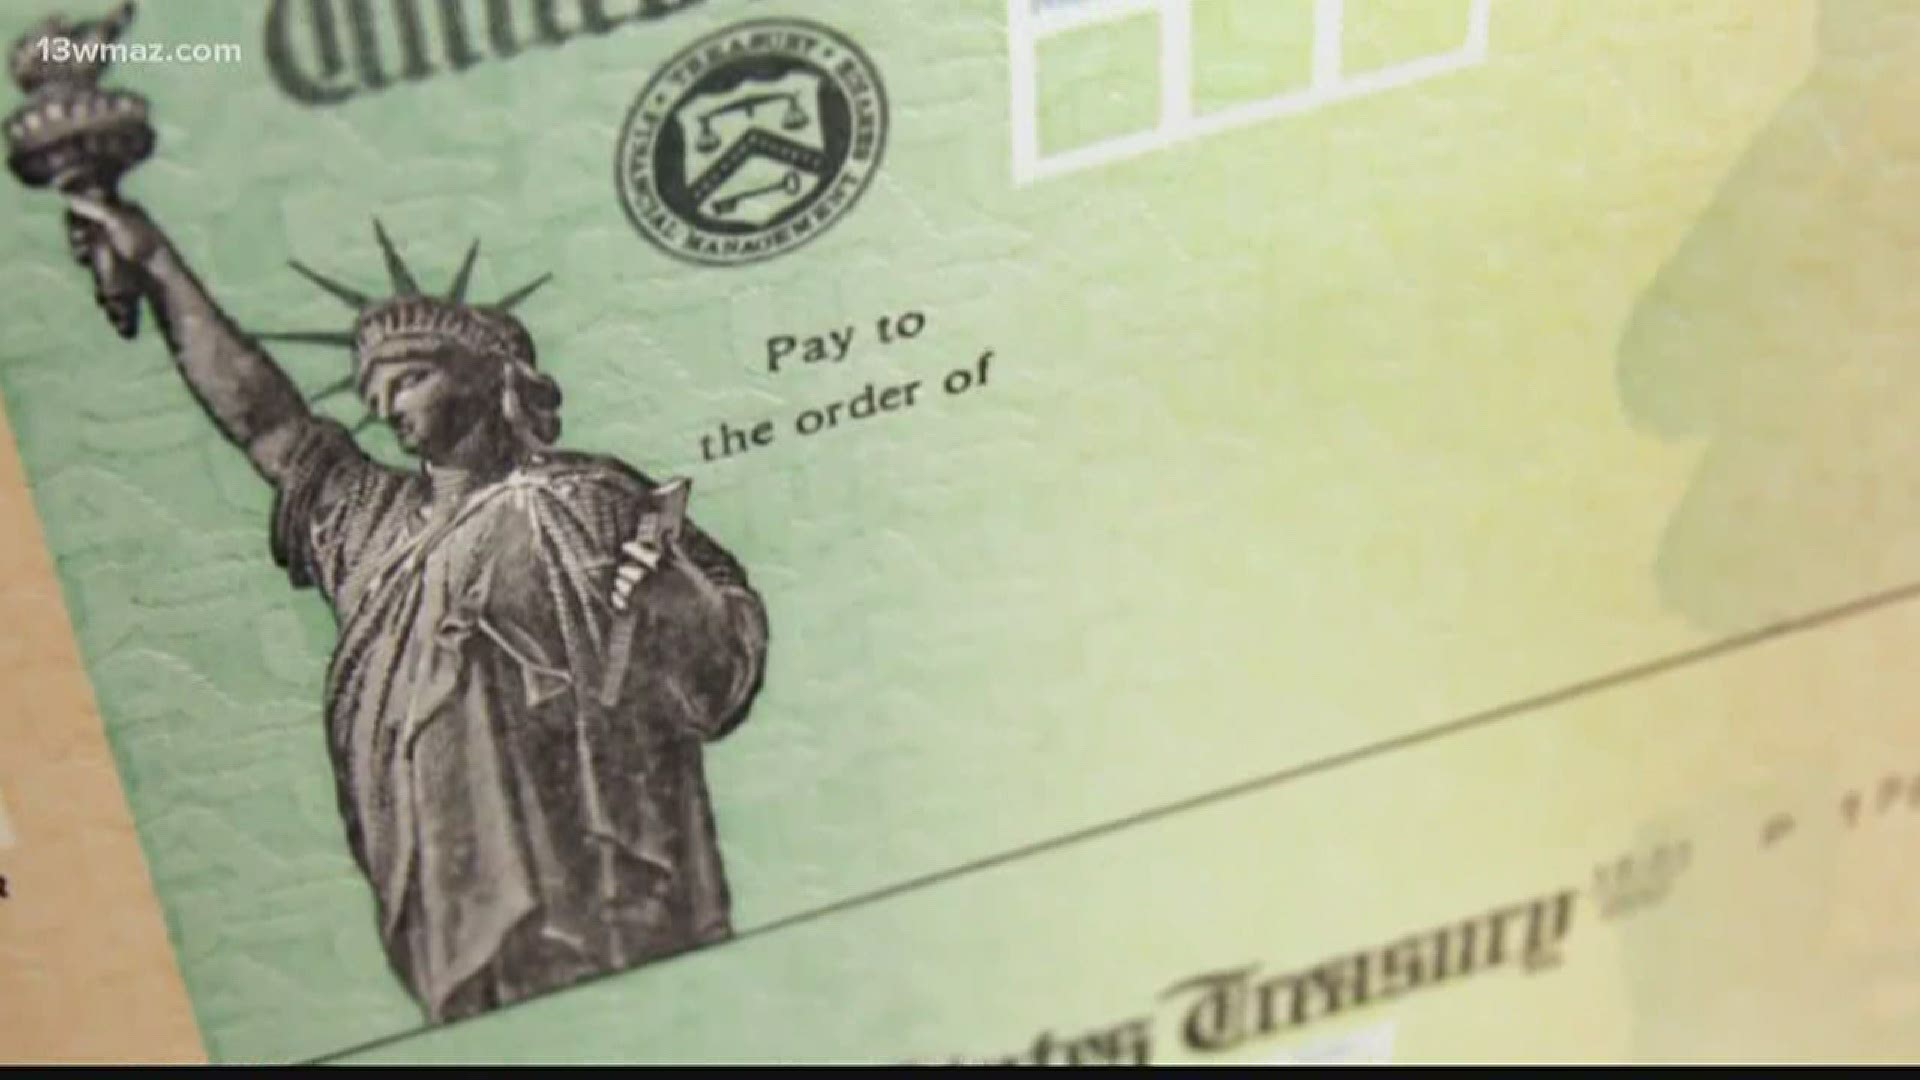 13WMAZ learned some tips from the Better Business Bureau to make sure scammers don't trick you out of your money.